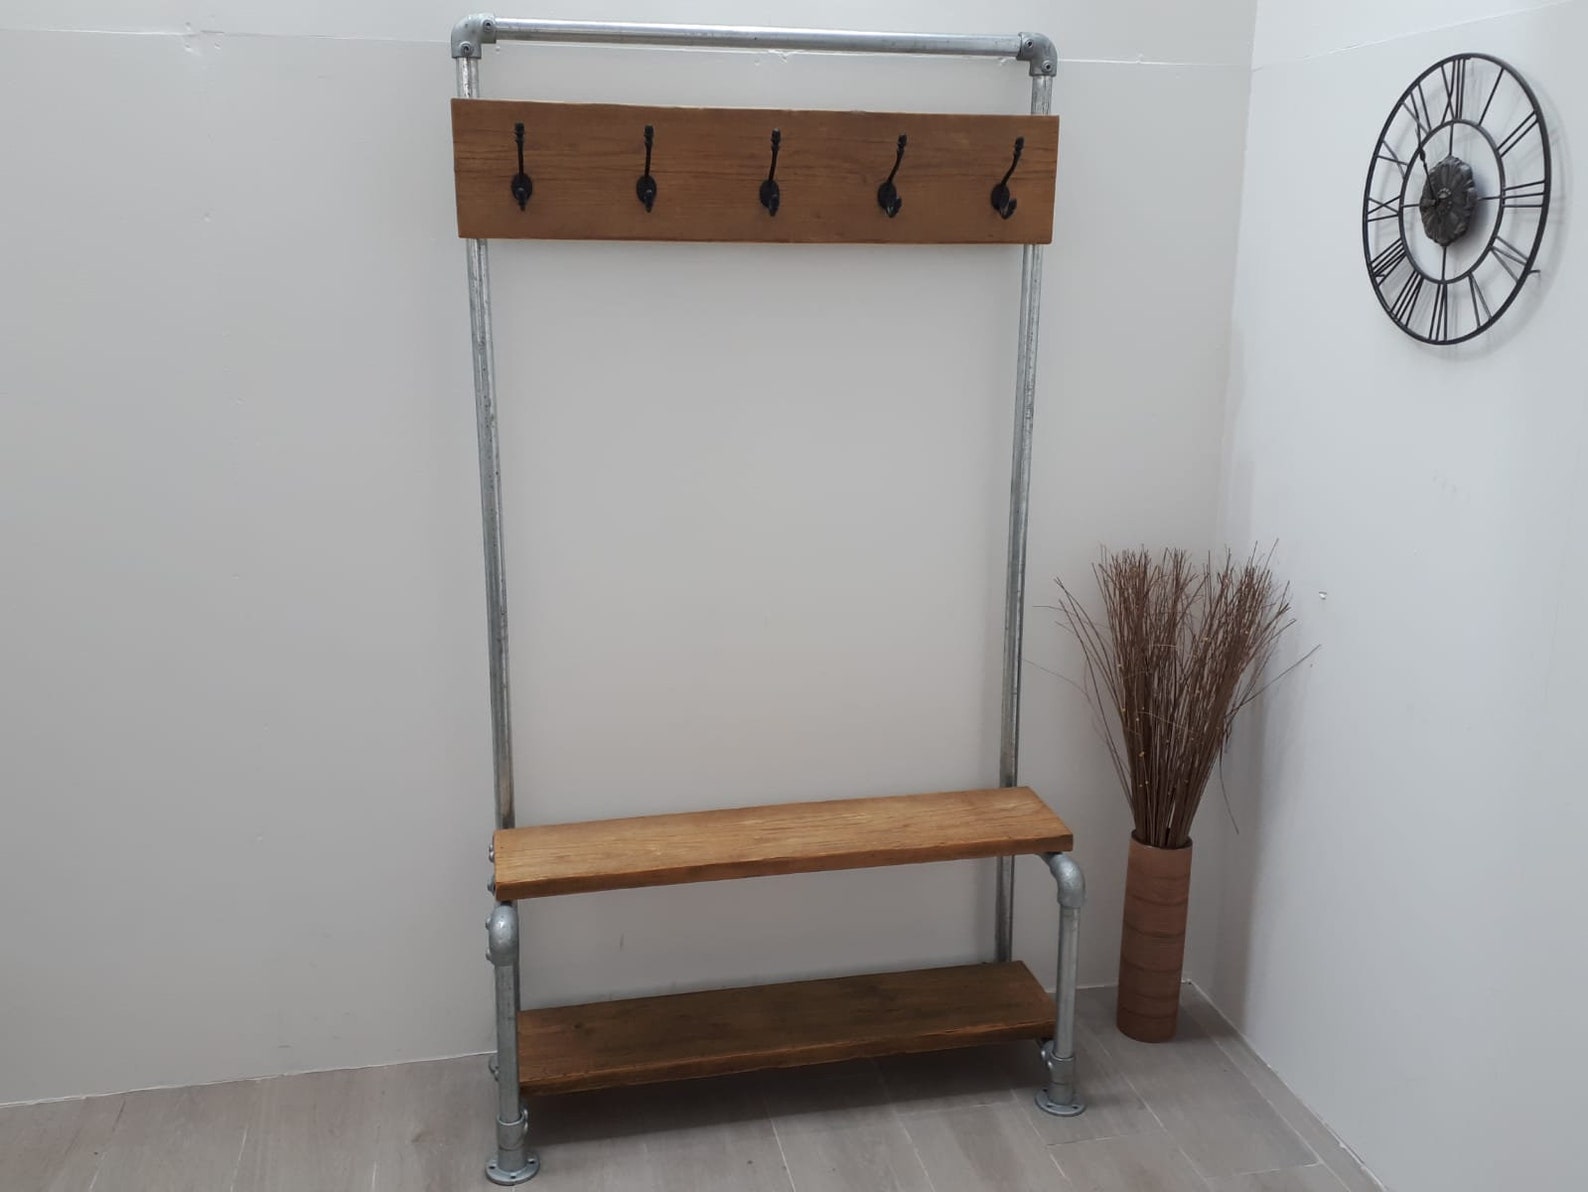 Getting excited for my new shoe rack! Featuring Industerior 